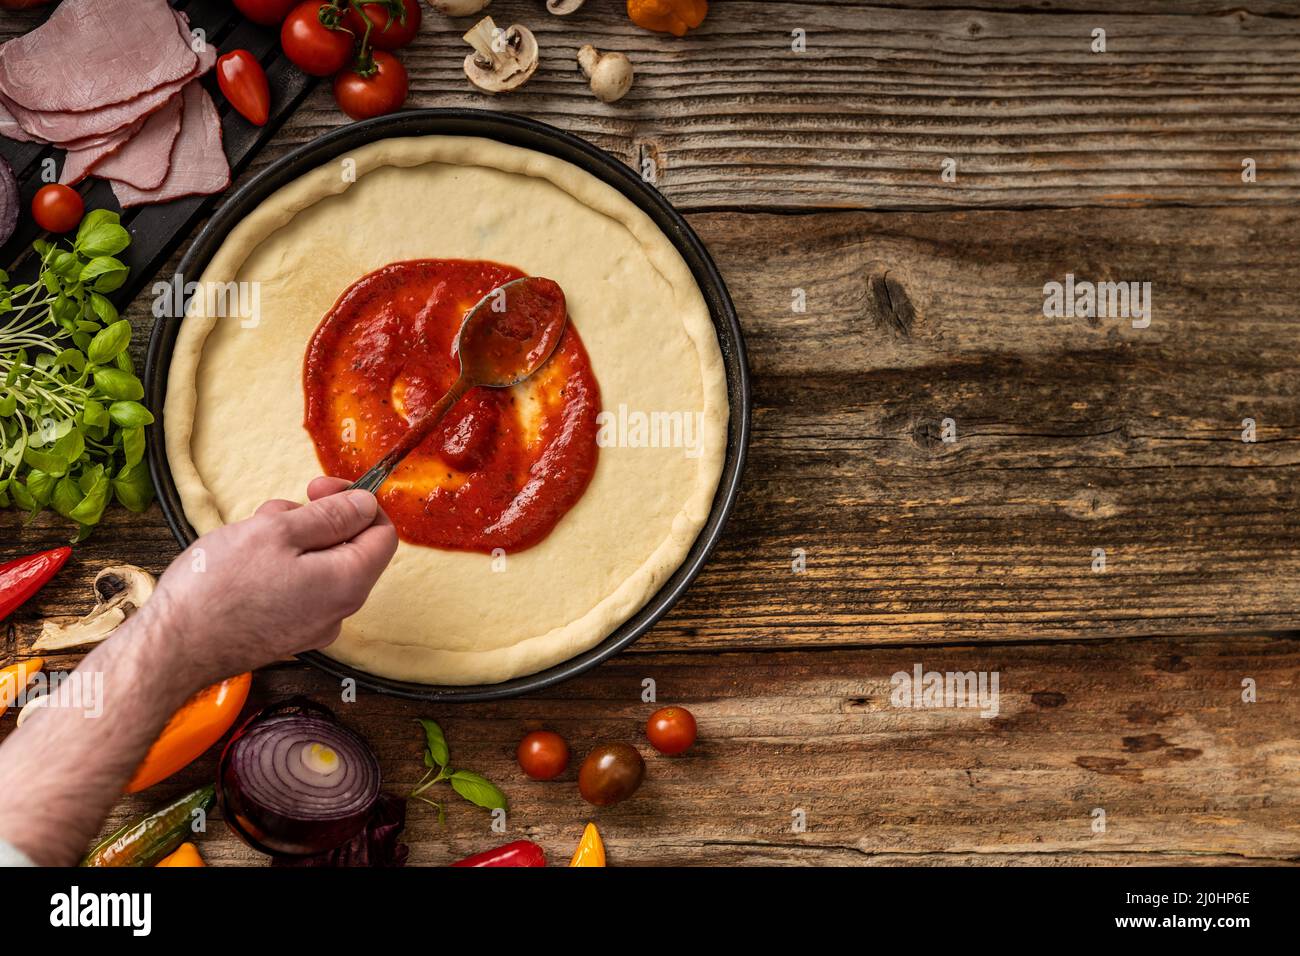 Raw delicious pizza dough with red souce on the wooden table Stock Photo